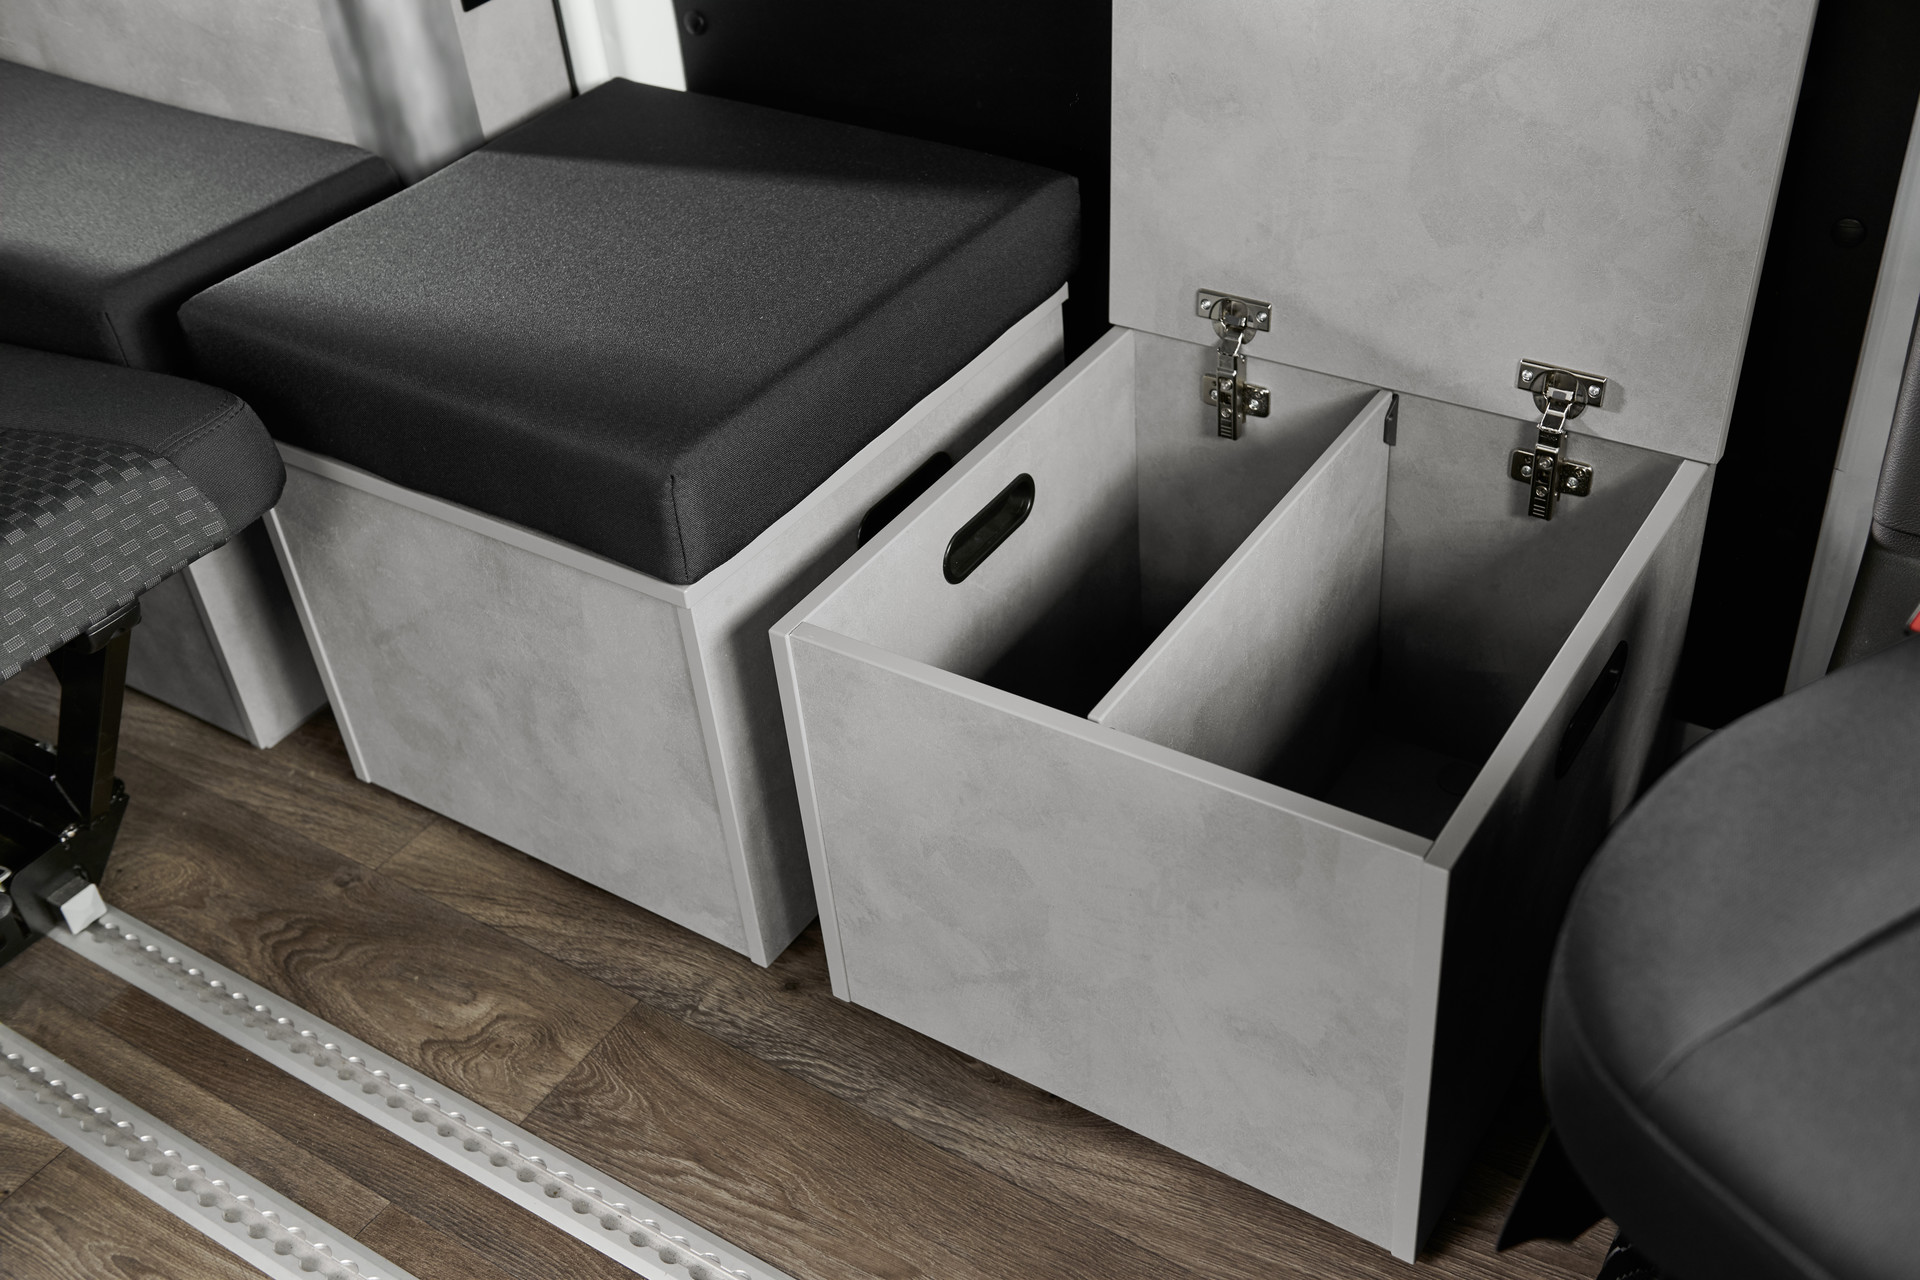 Two storage boxes attached with knurled screws offer plenty of space for everything you need to keep close to hand – and can also be used as stools outside the vehicle.